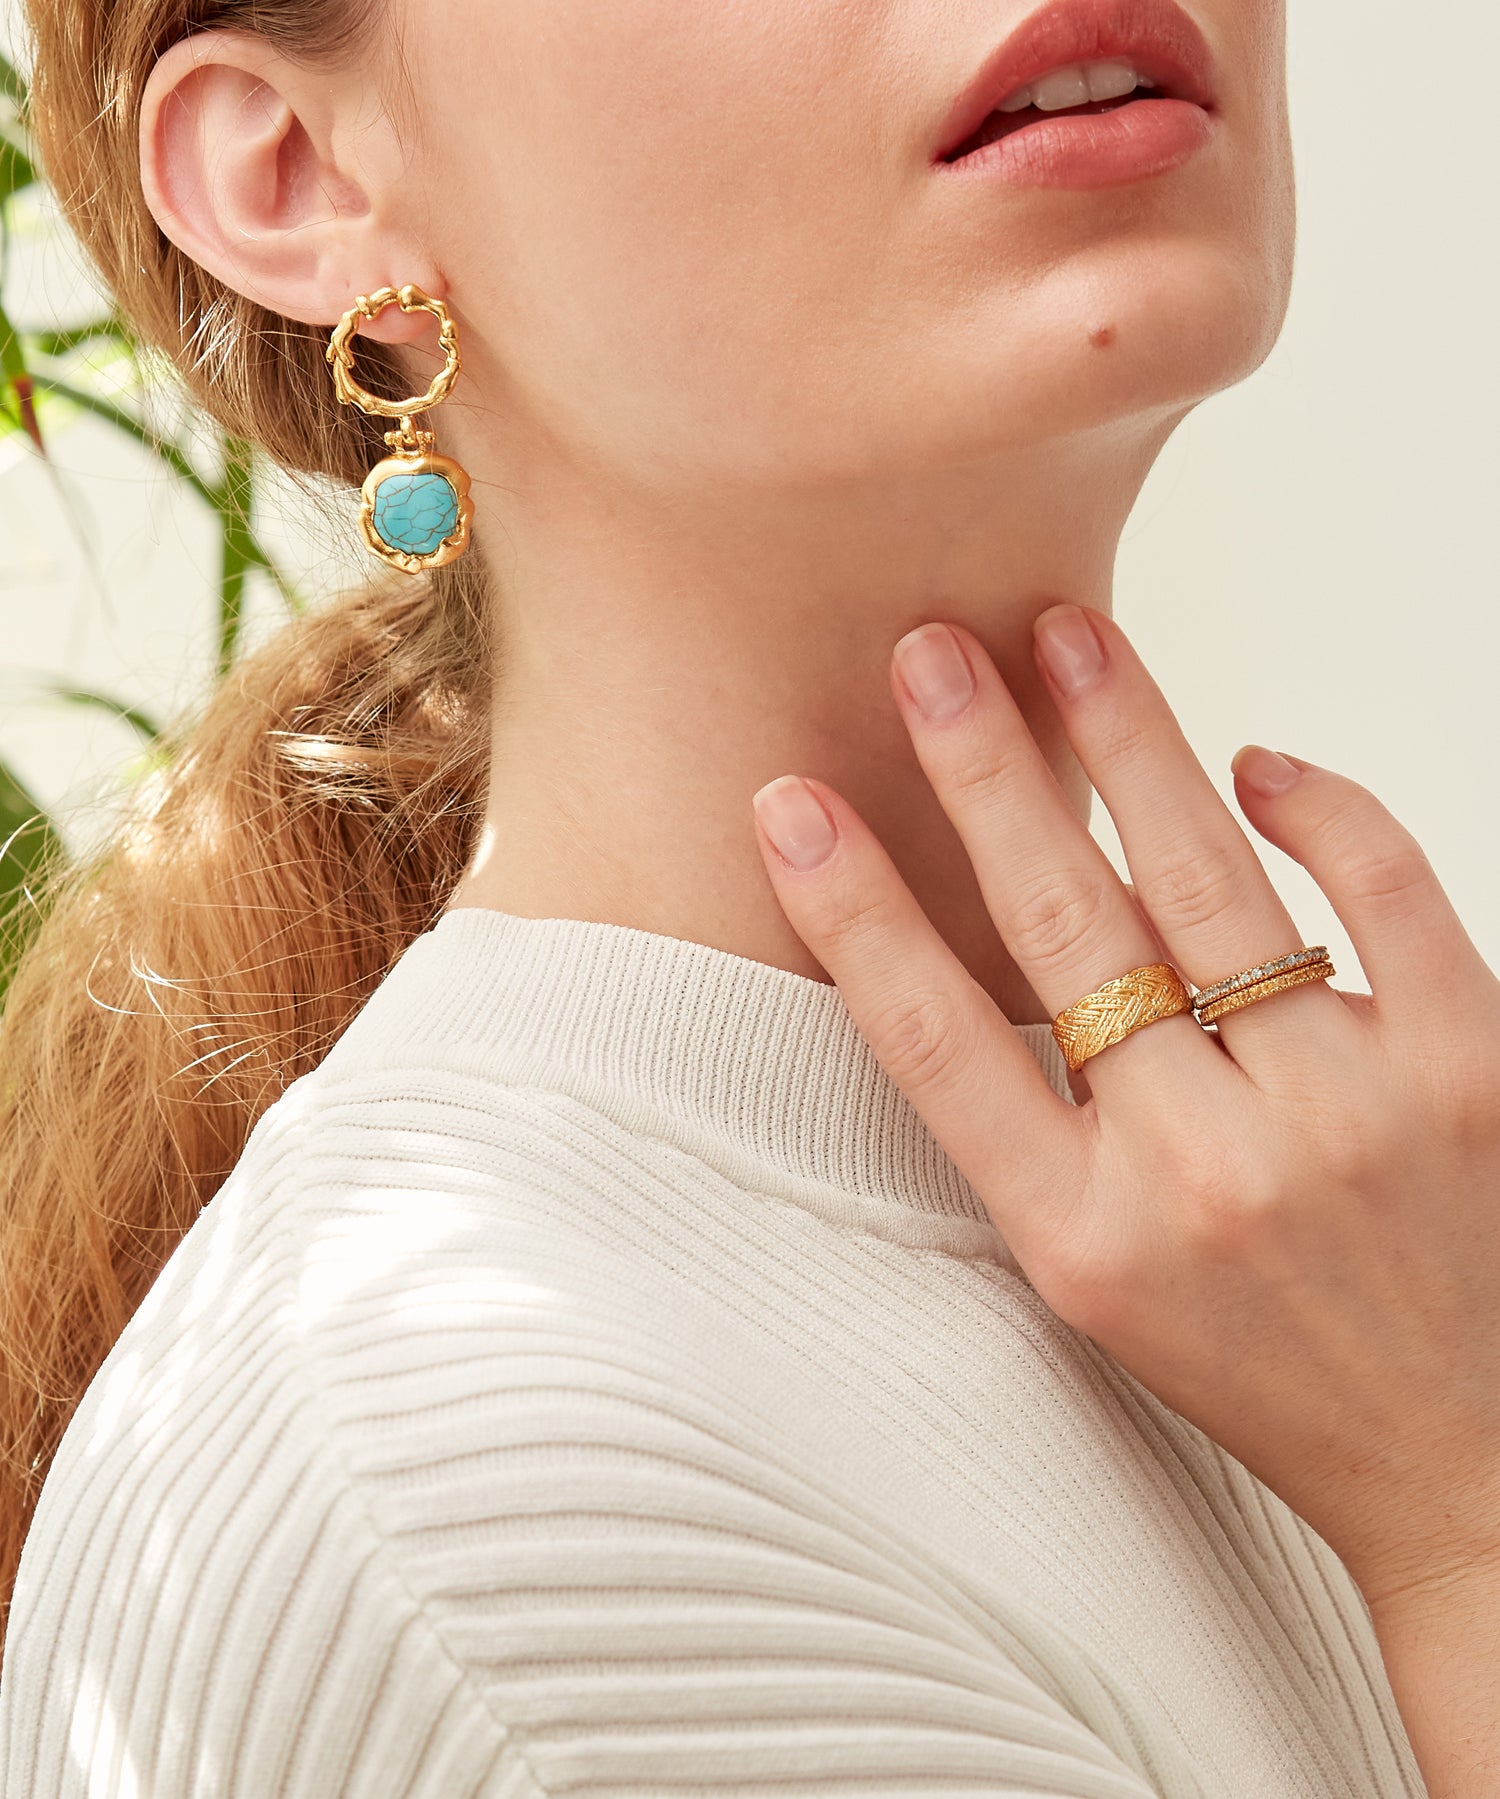 Demetra Braided Stacking Ring | Sustainable Jewellery by Ottoman Hands